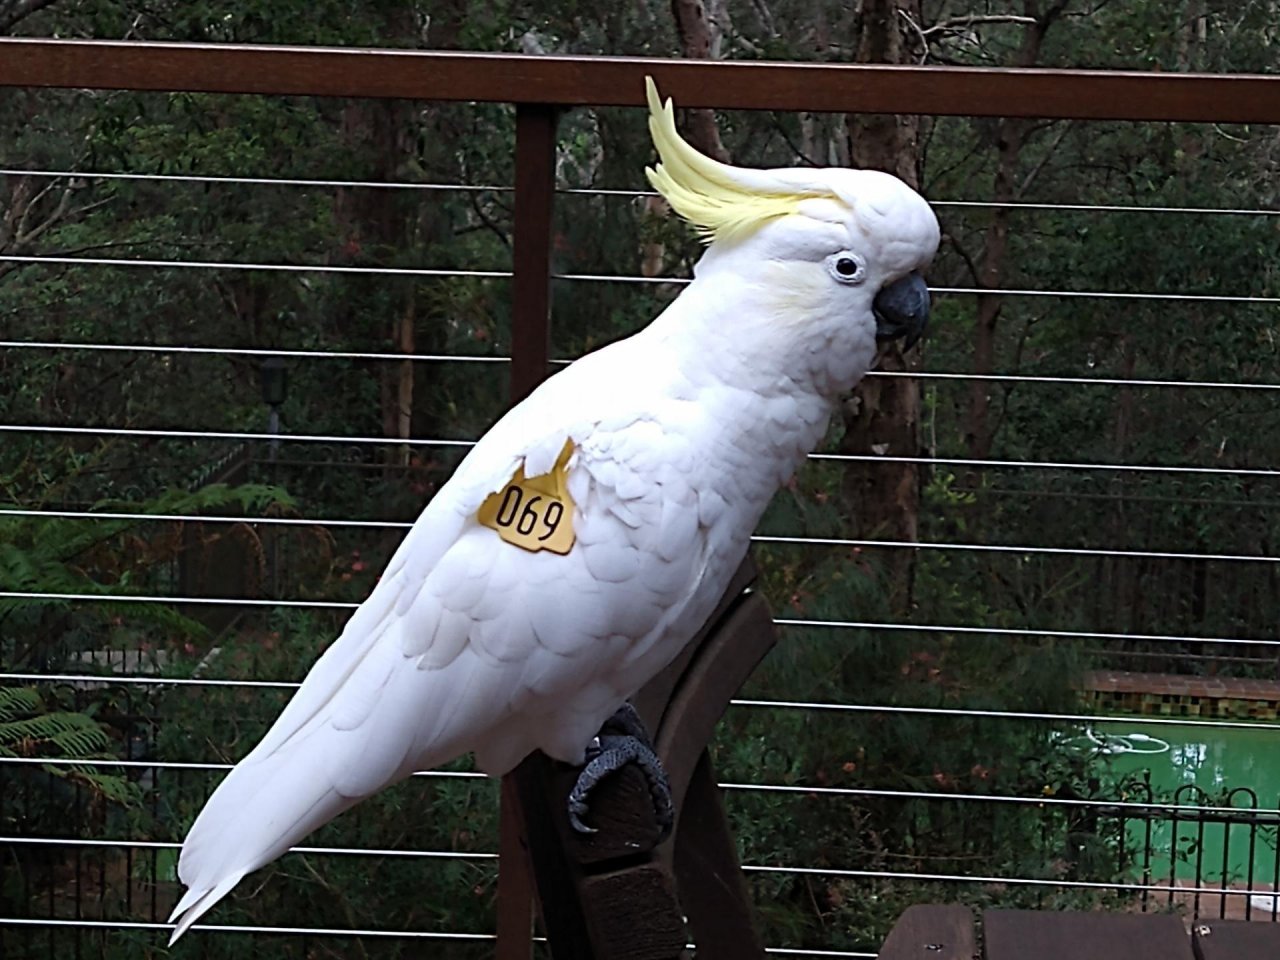 Sulphur-crested Cockatoo in Big City Birds App spotted by John Kalman on 13.12.2020